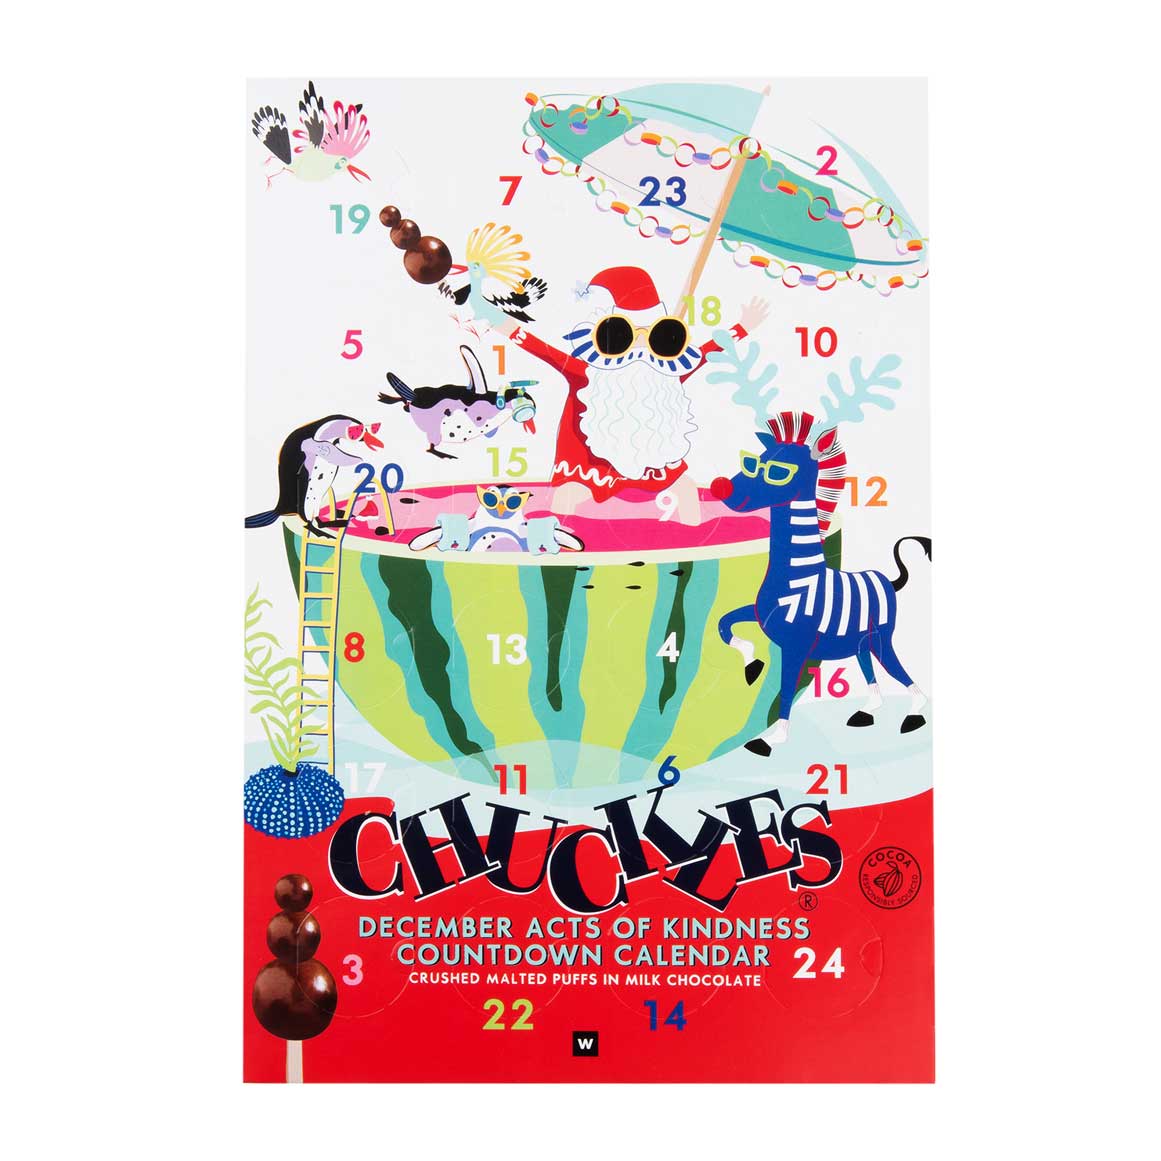 Christmas Countdown Calendar with Chuckles® Malted Puffs Festive Shapes